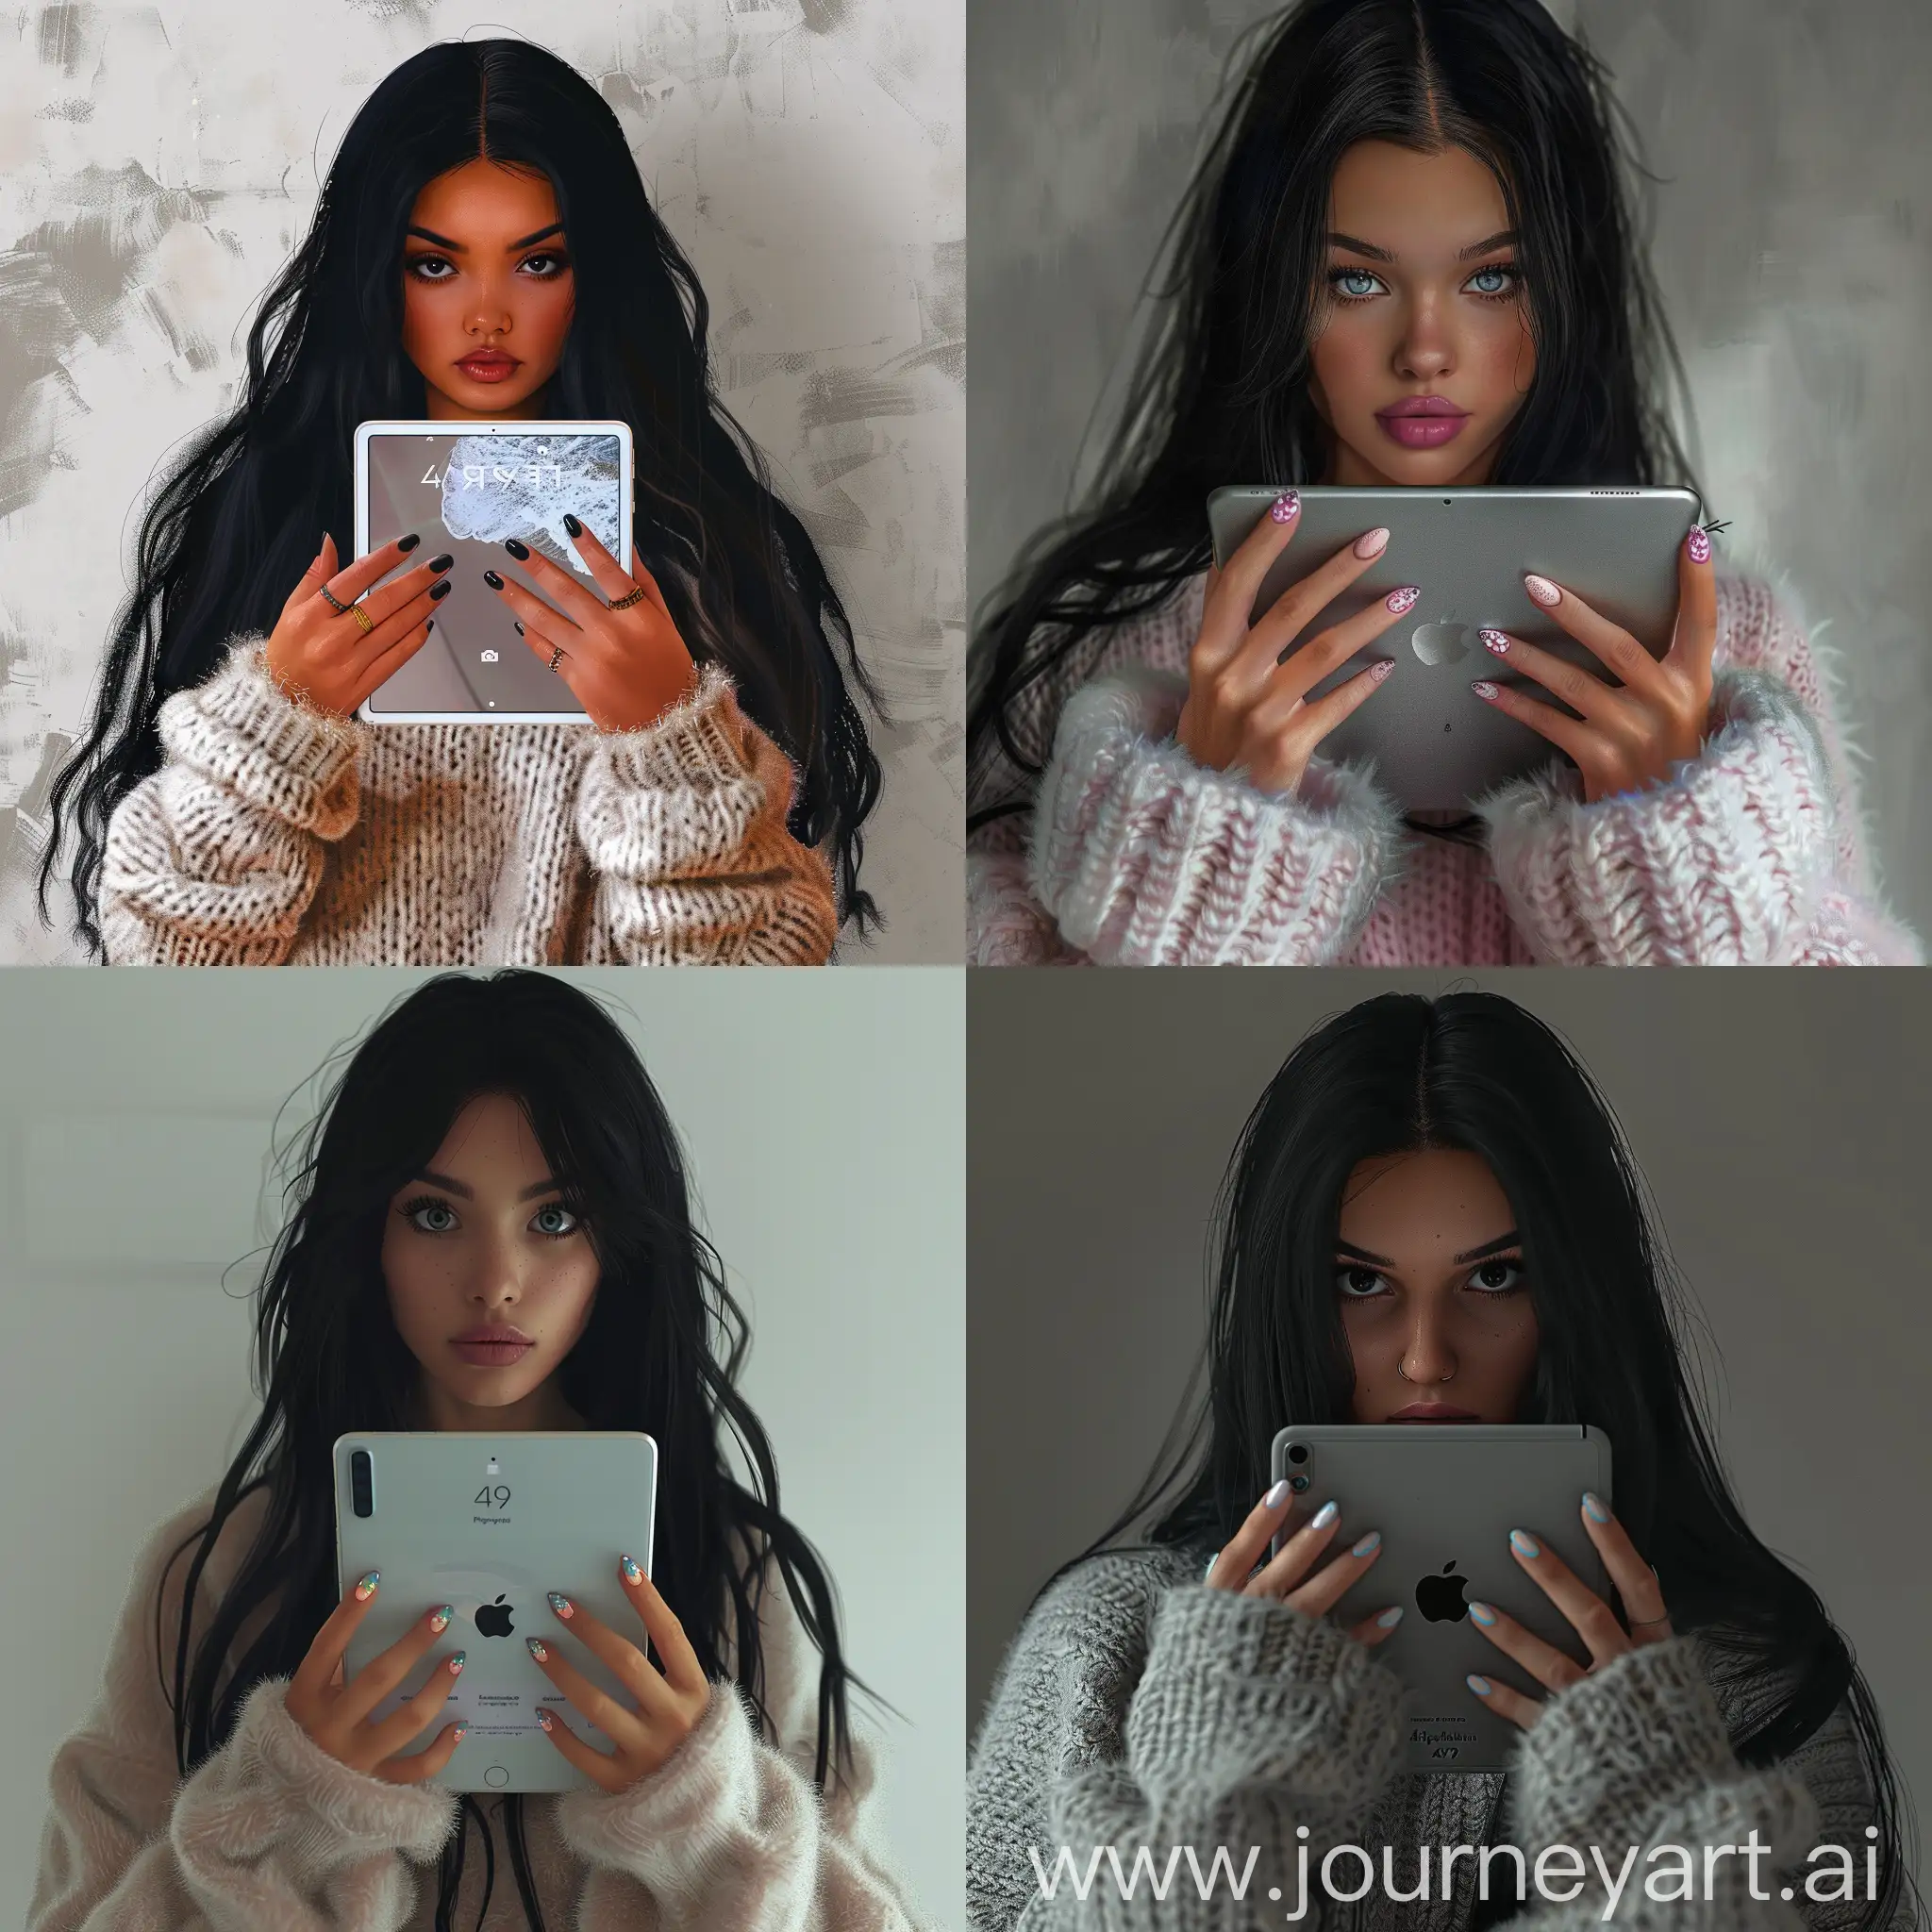 Young-Woman-with-Long-Black-Hair-Sharing-iPad-9-in-Photorealistic-Scene